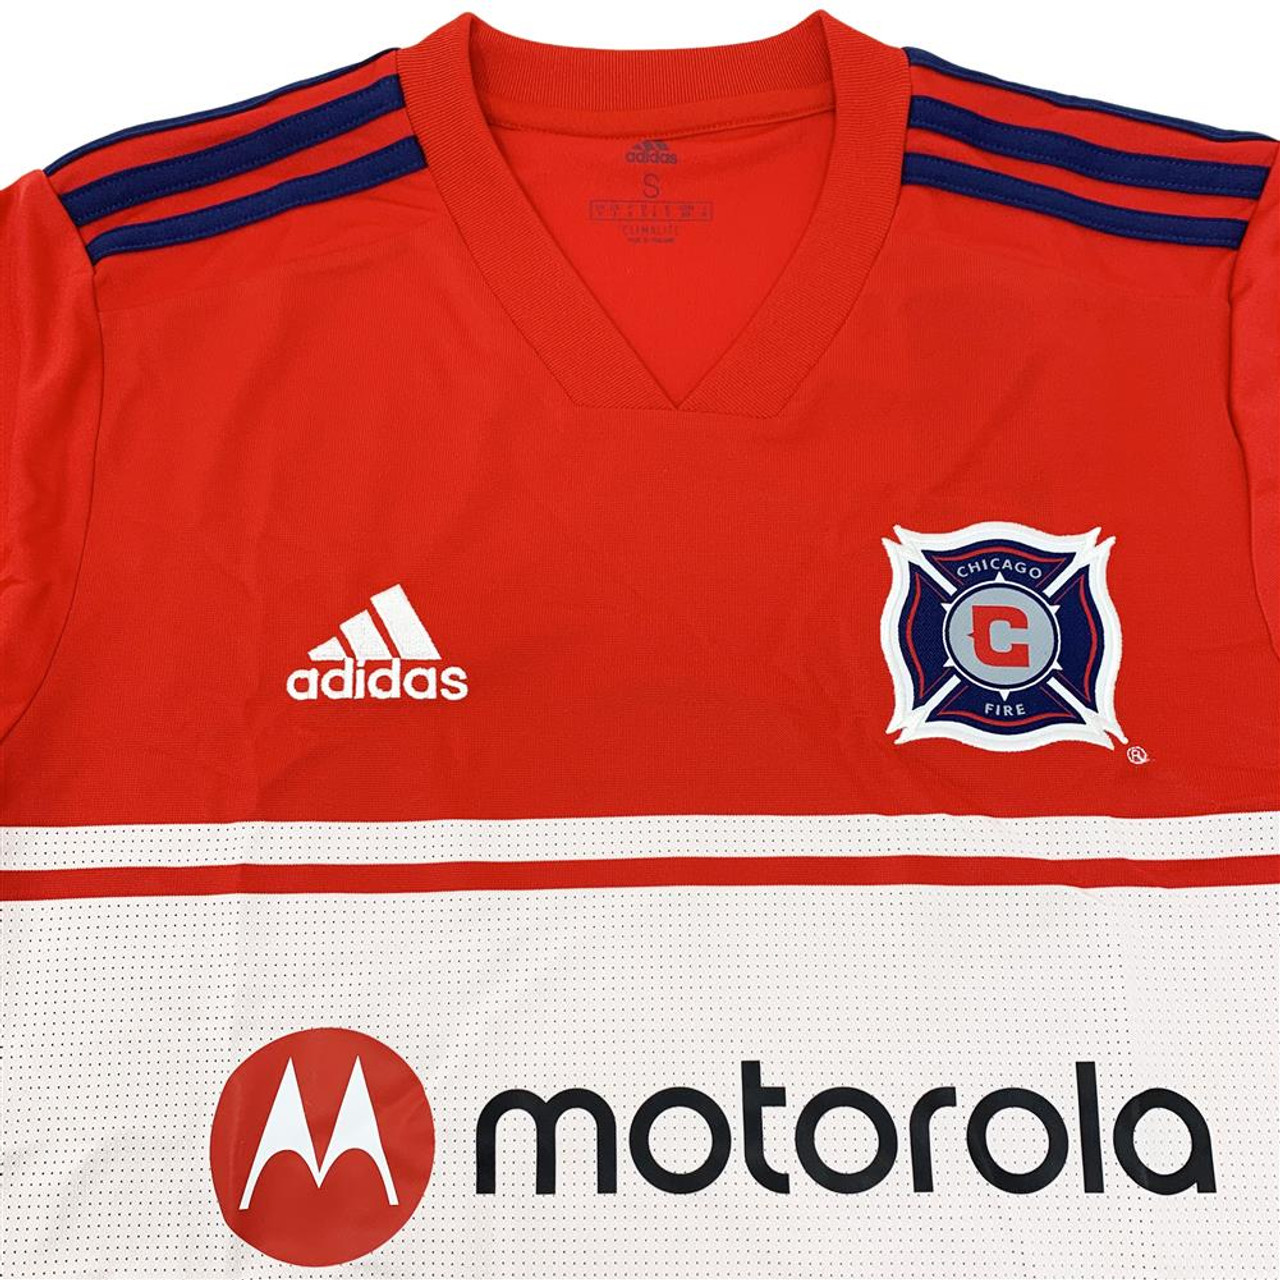 Chicago Fire Jerseys, Chicago Fire Kits, Jersey